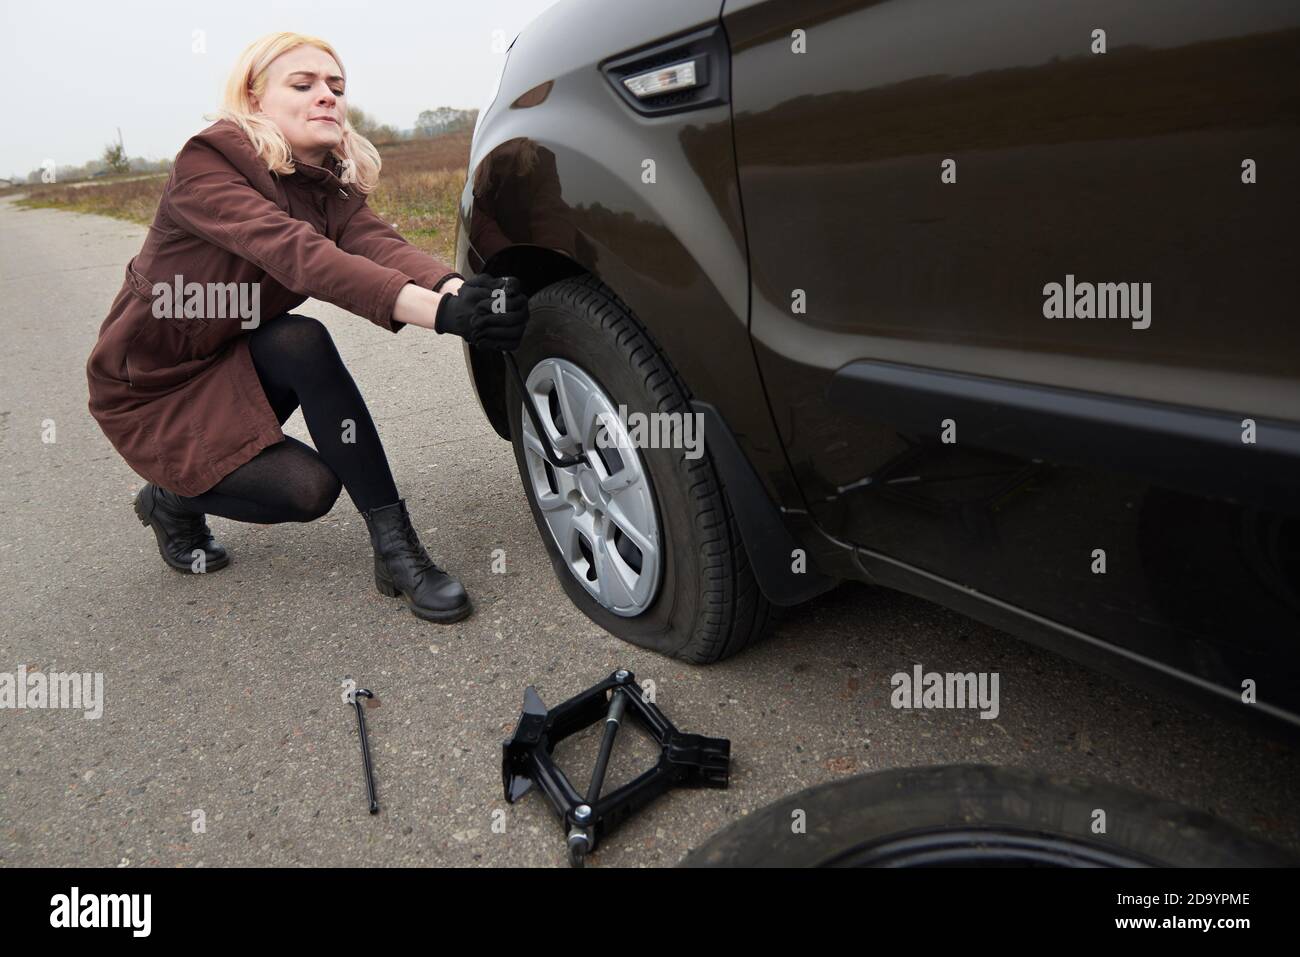 A Young Blonde Woman Removes The Wheel With A Key Near Her Car With A